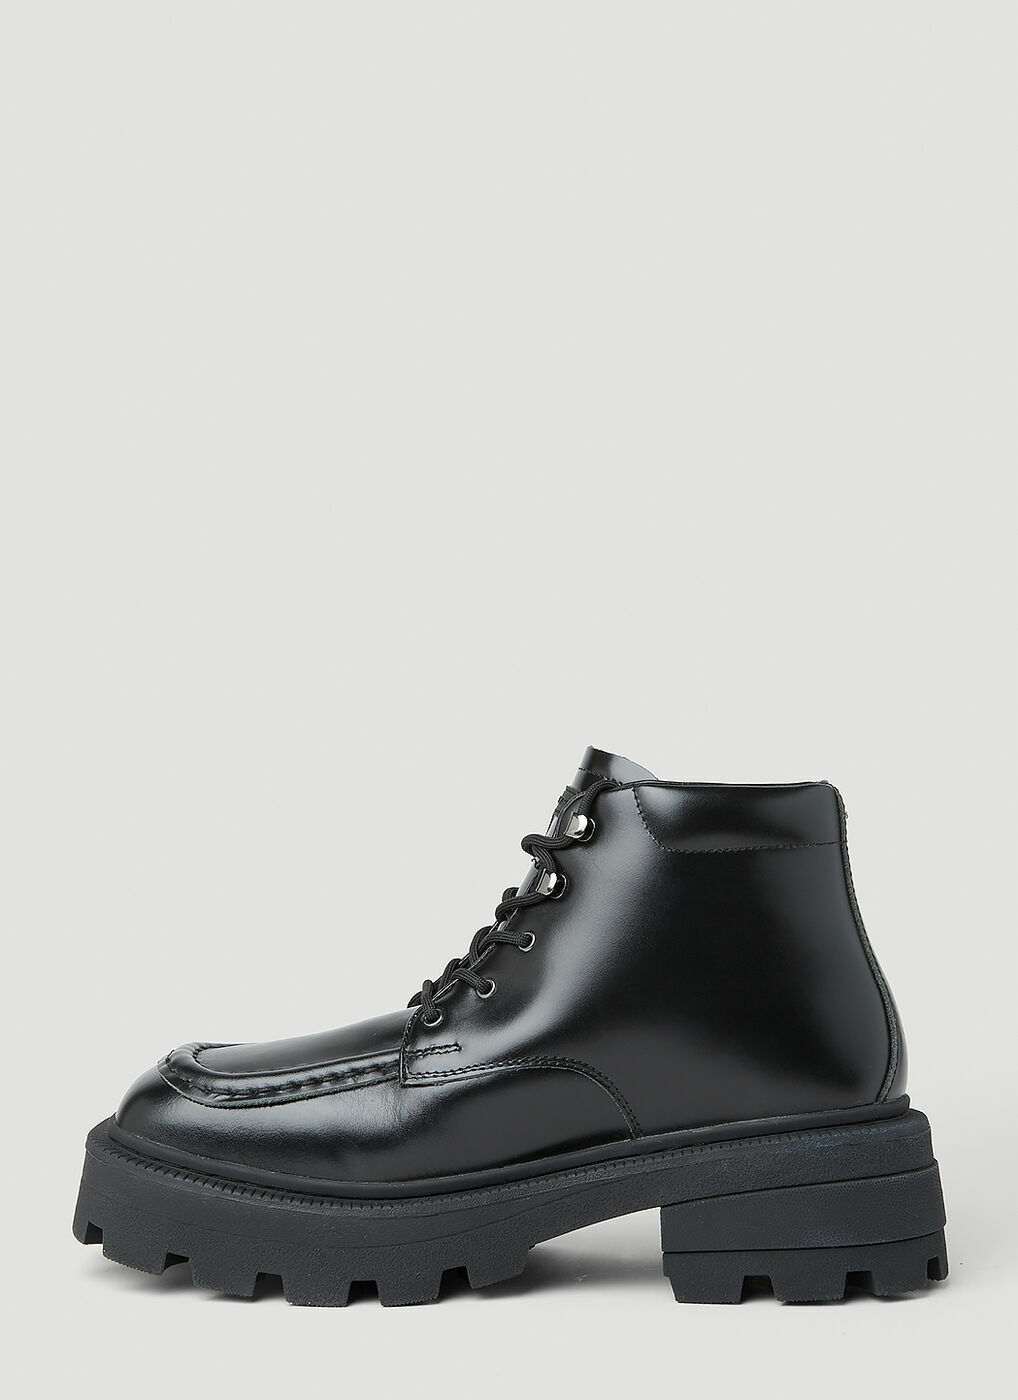 Tribeca Lace Up Boots in Black Eytys